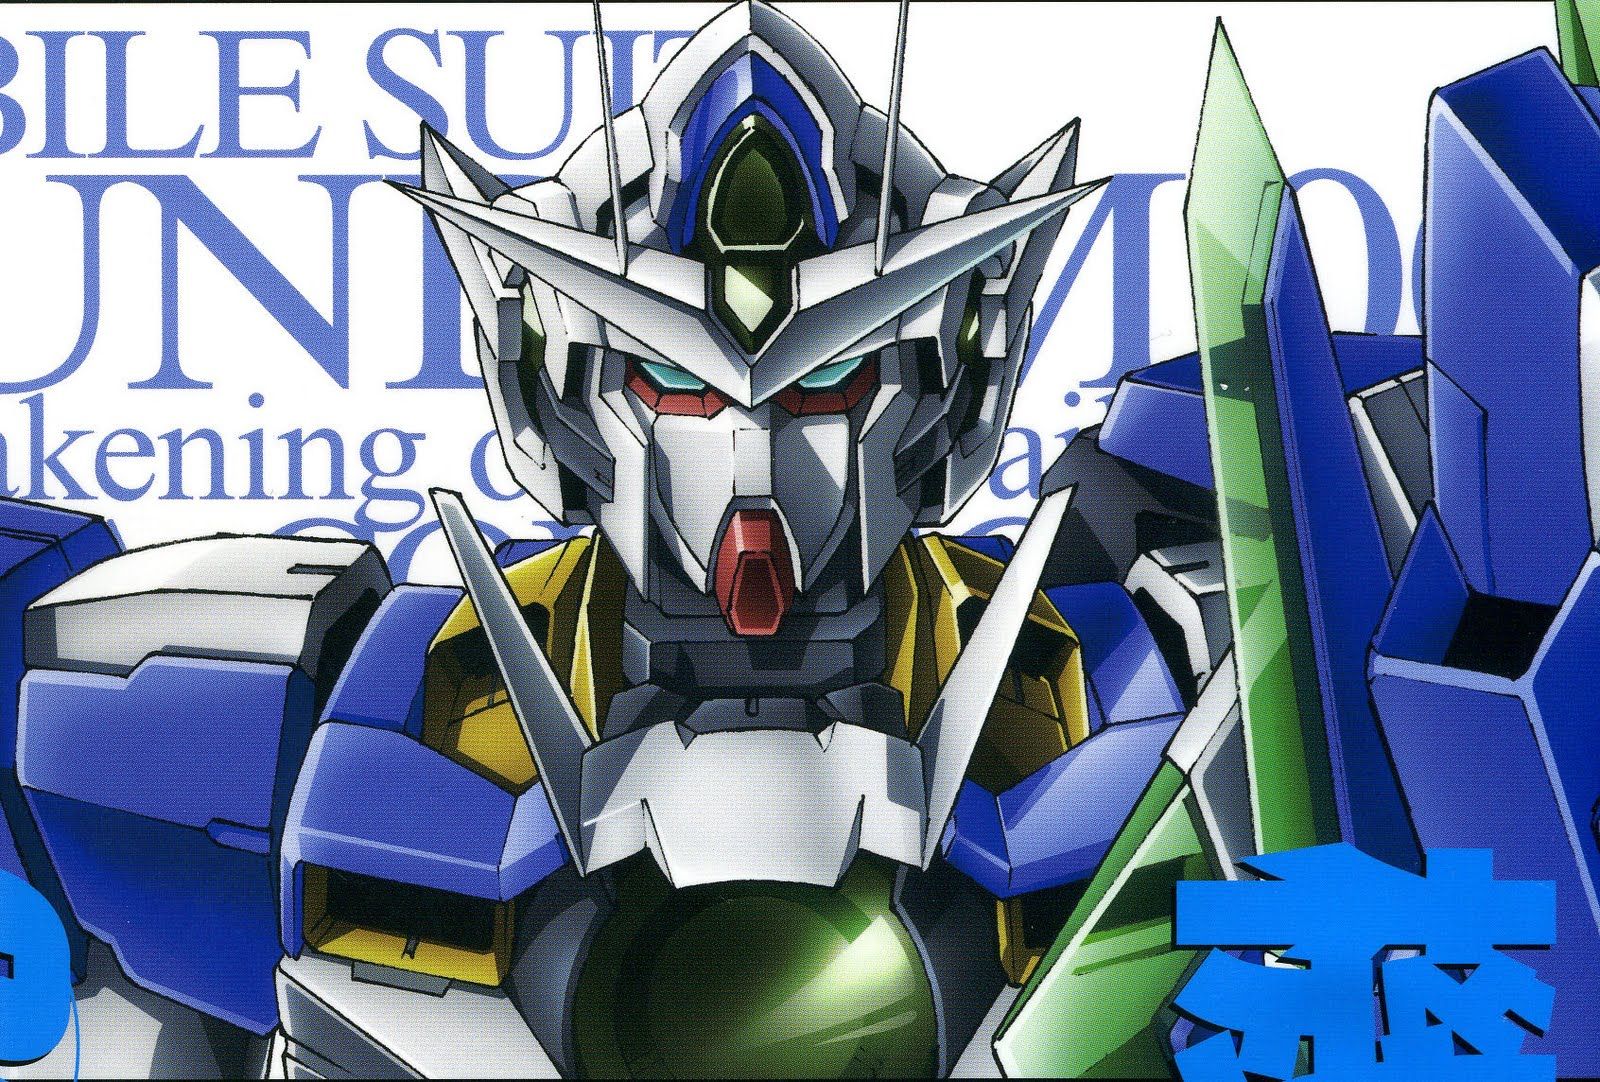 Free Download Wallpapers For Gundam 00 Movie Wallpaper 1600x10 For Your Desktop Mobile Tablet Explore 73 Gundam 00 Movie Wallpaper Gundam Exia Wallpaper Gundam Iphone Wallpaper Gundam X Wallpaper